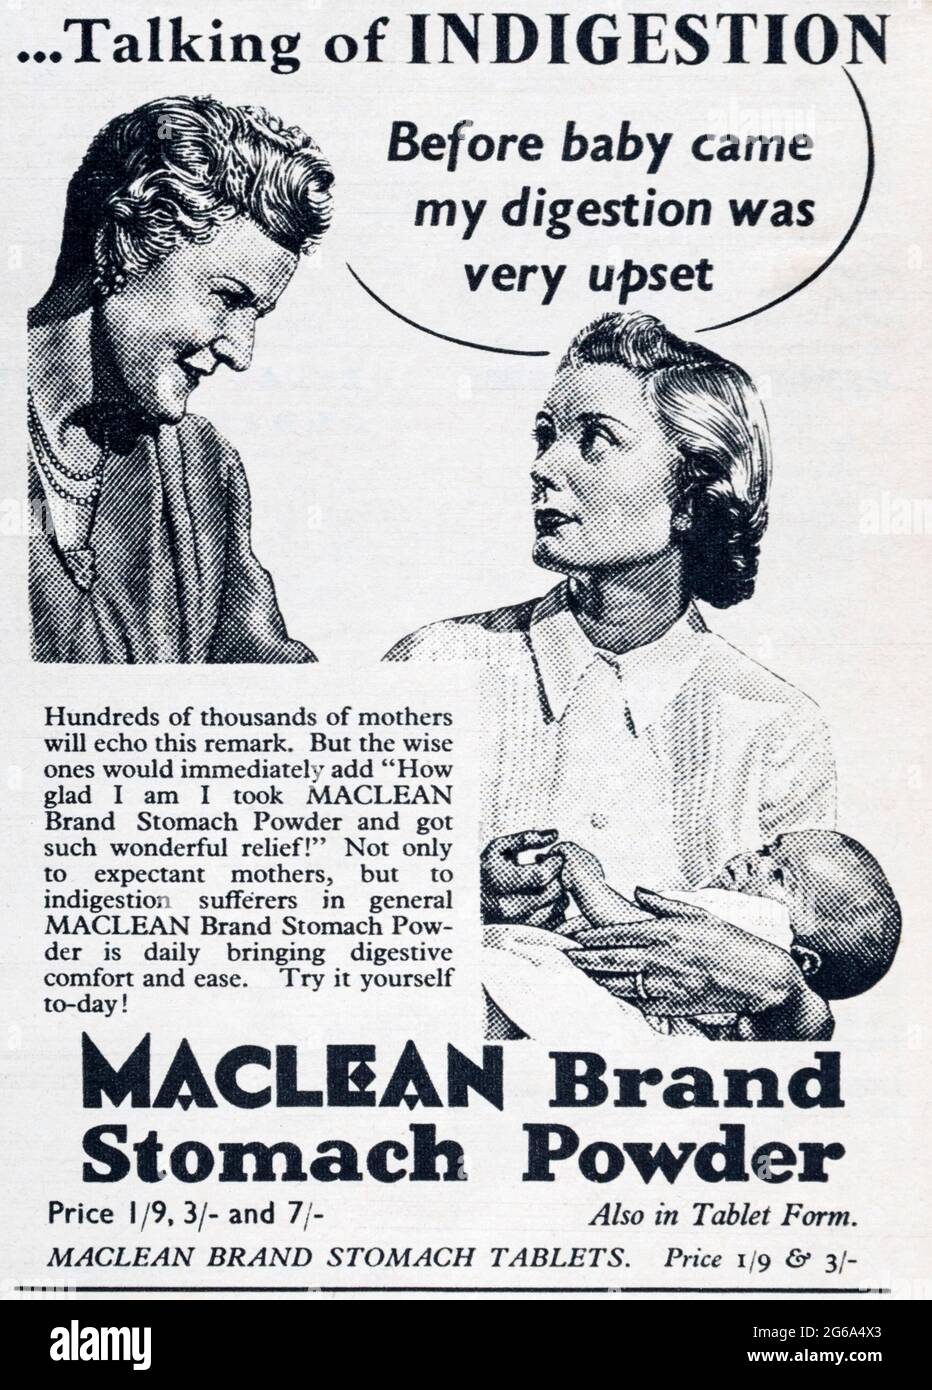 A 1950s magazine advertisement for Maclean brand stomach powder. Stock Photo